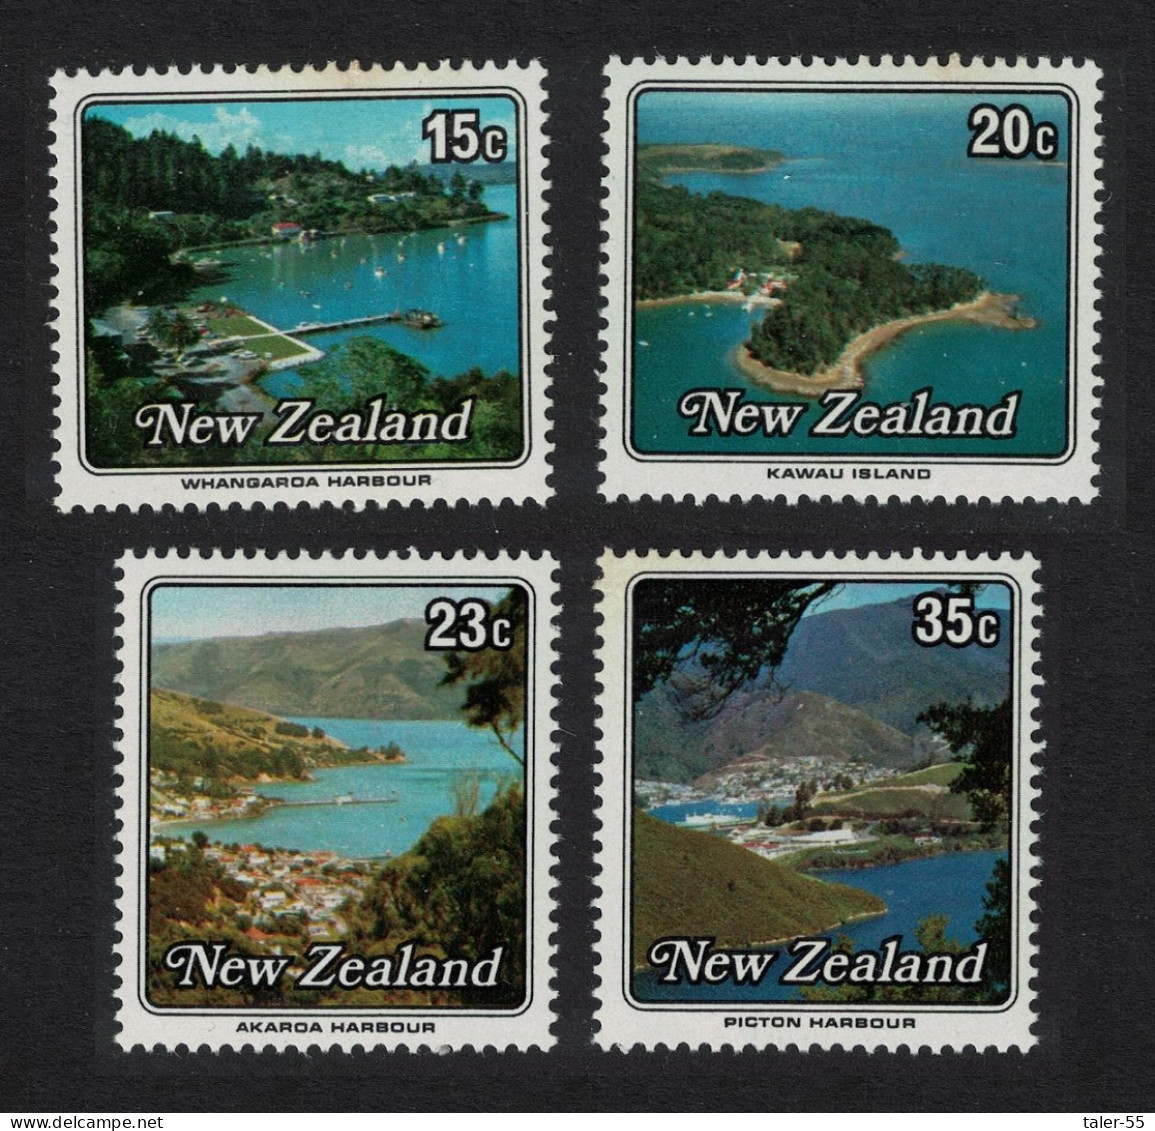 New Zealand Small Harbours 4v 1979 MNH SG#1192-1195 - Ungebraucht